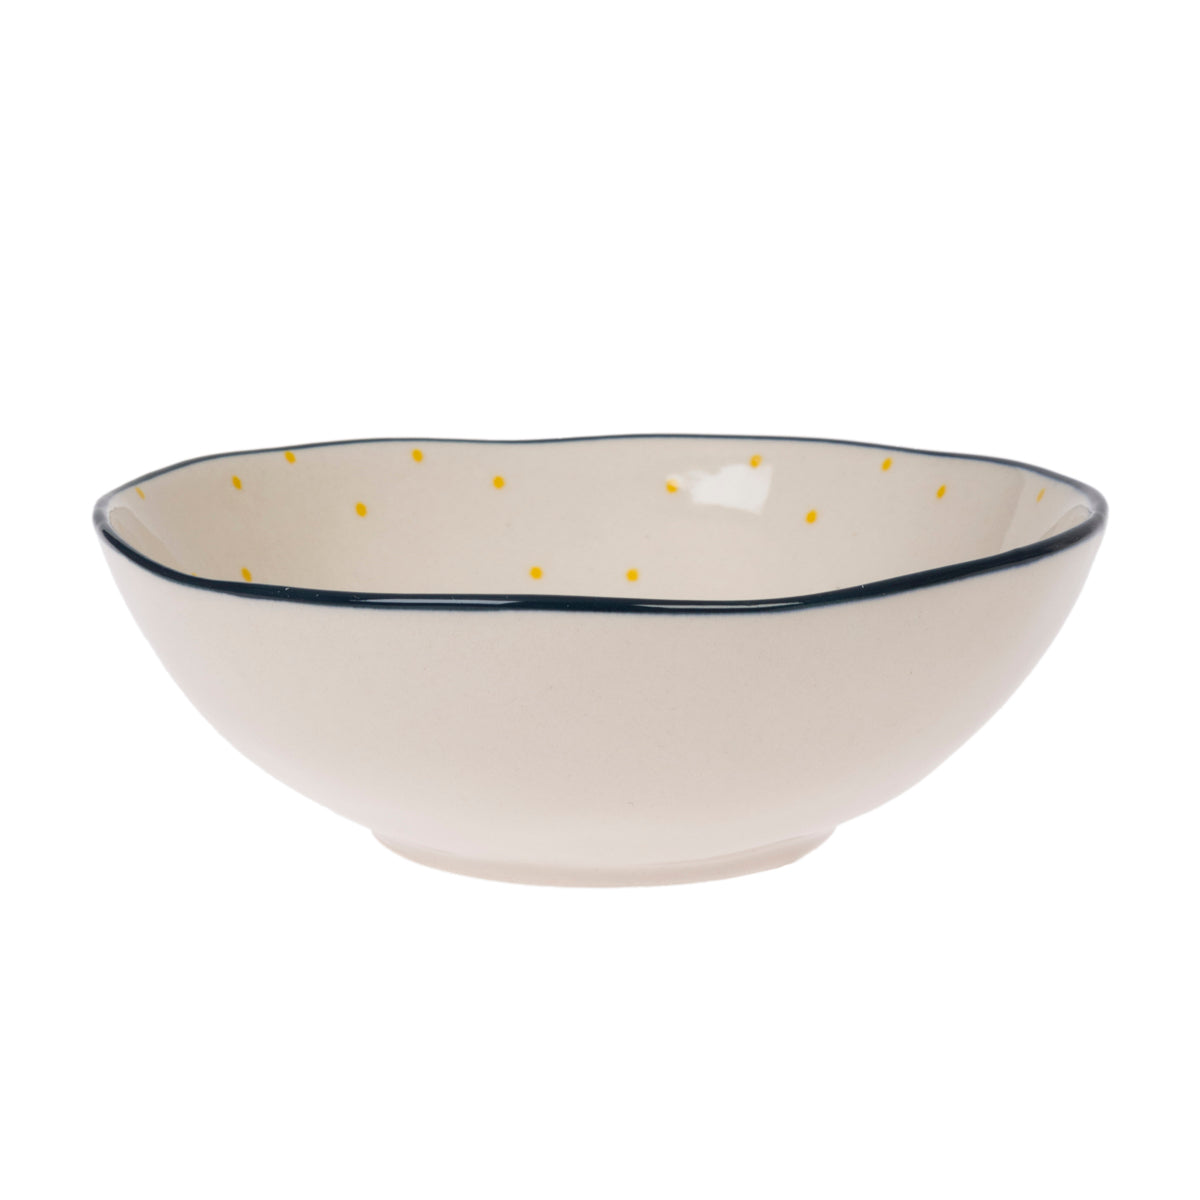 Bees Stoneware Nibbles Bowl by Sophie Allport